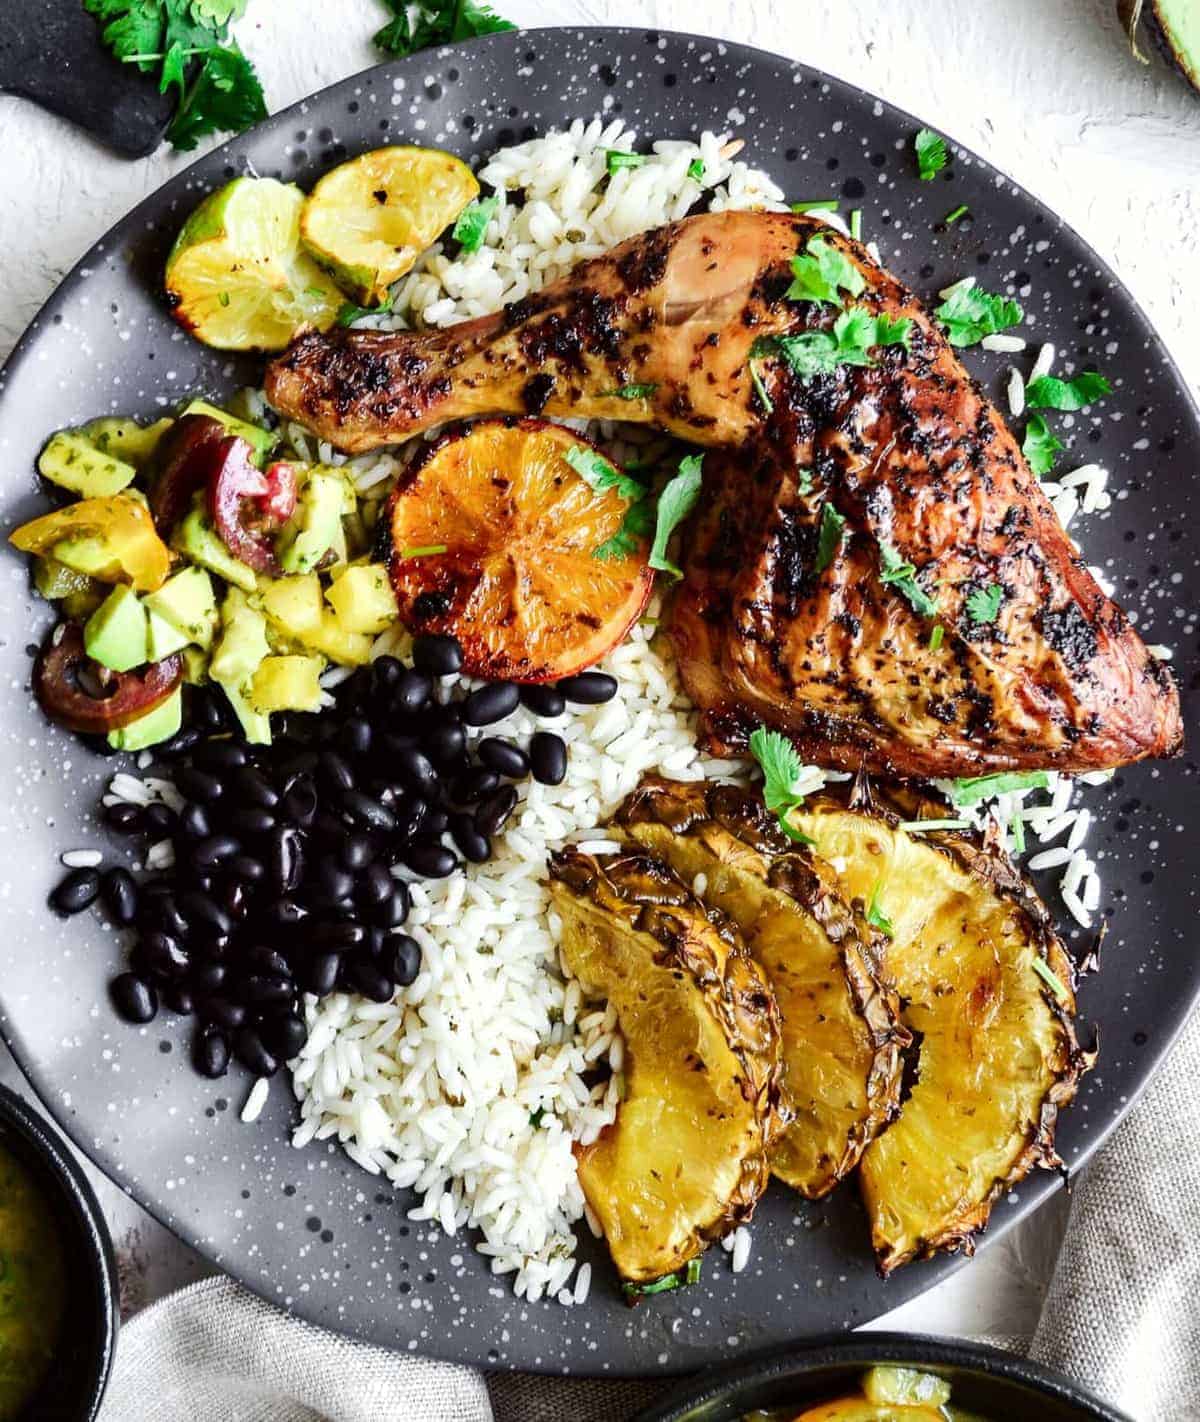 Top shot of Cuban mojo chicken served on a black plate with salsa, rice and black beans